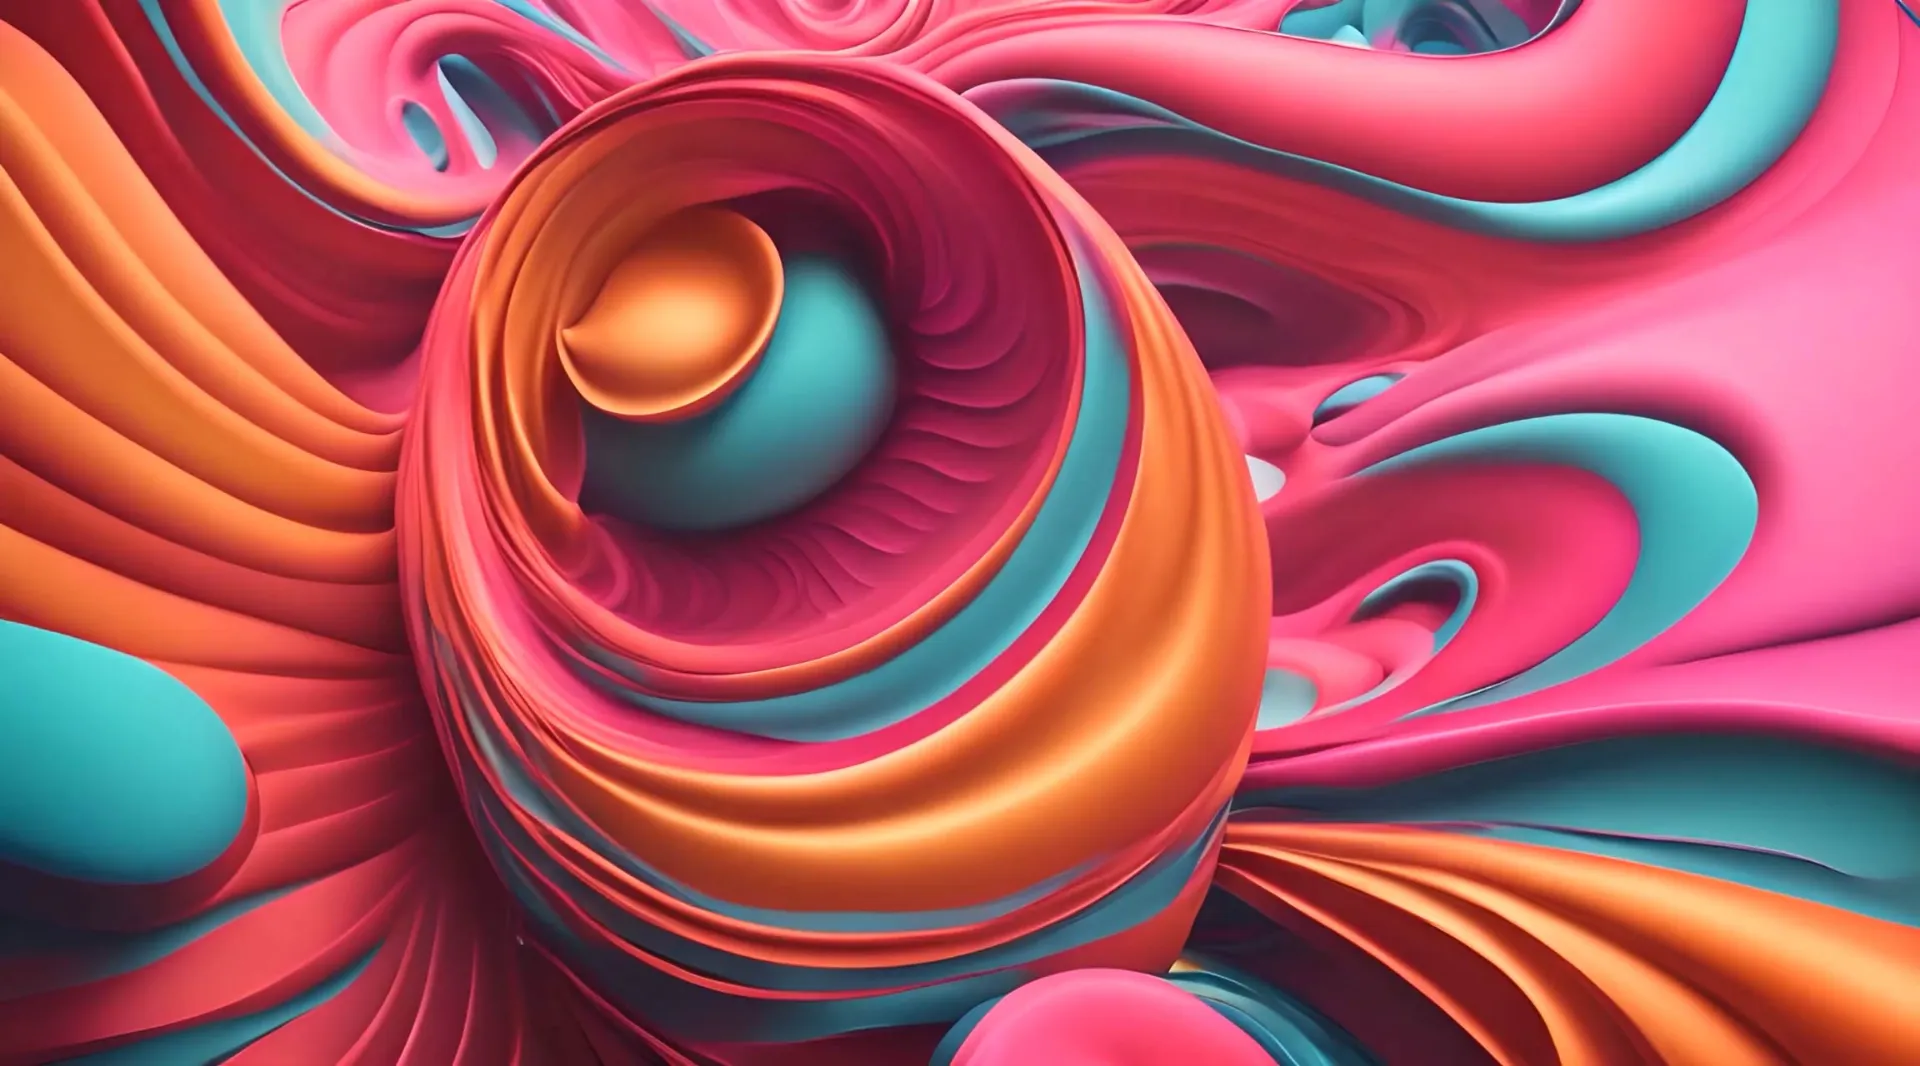 Vibrant Vortex Colorful Swirl Abstract Backdrop